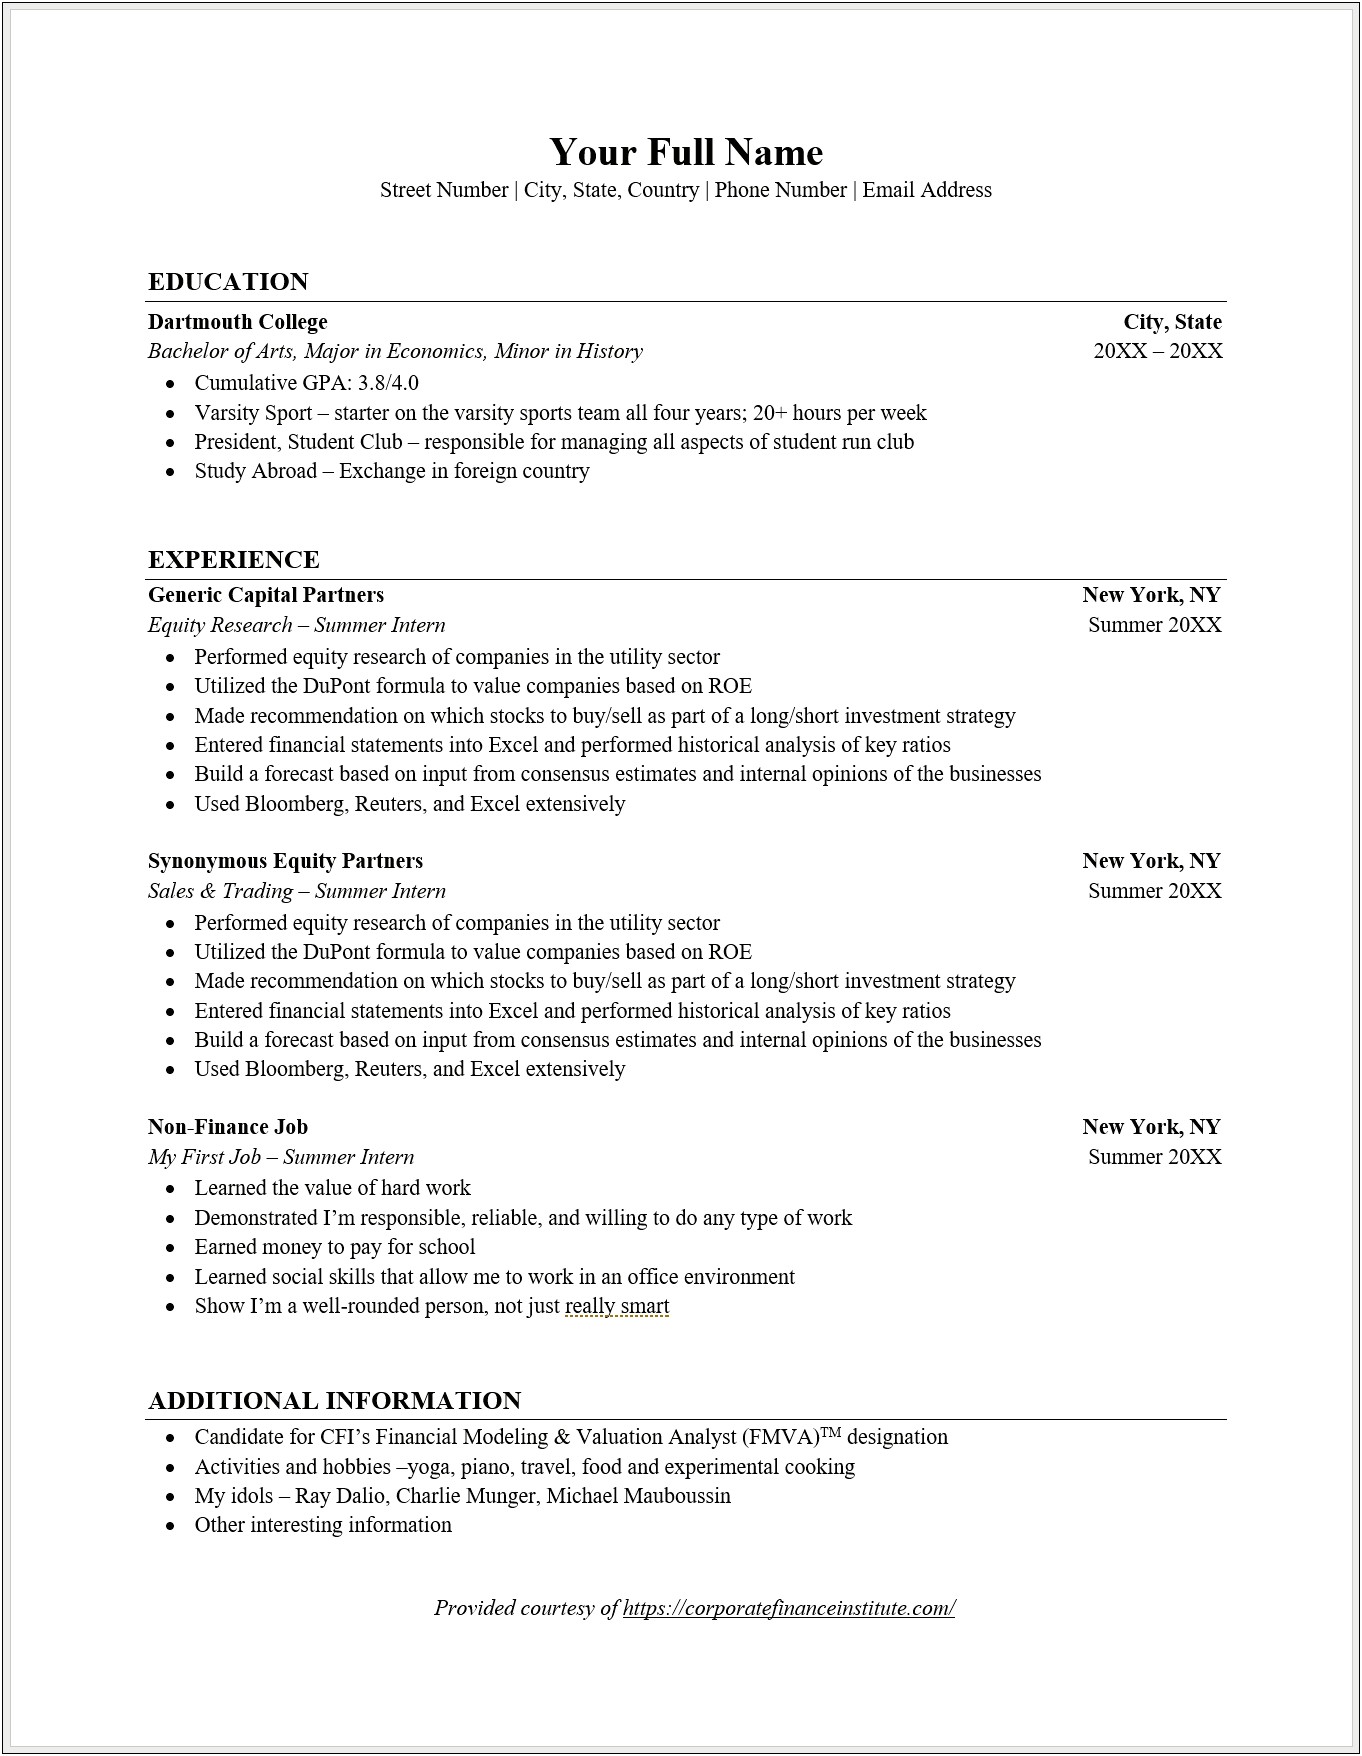 Resume With Bachelor's Degree Sample